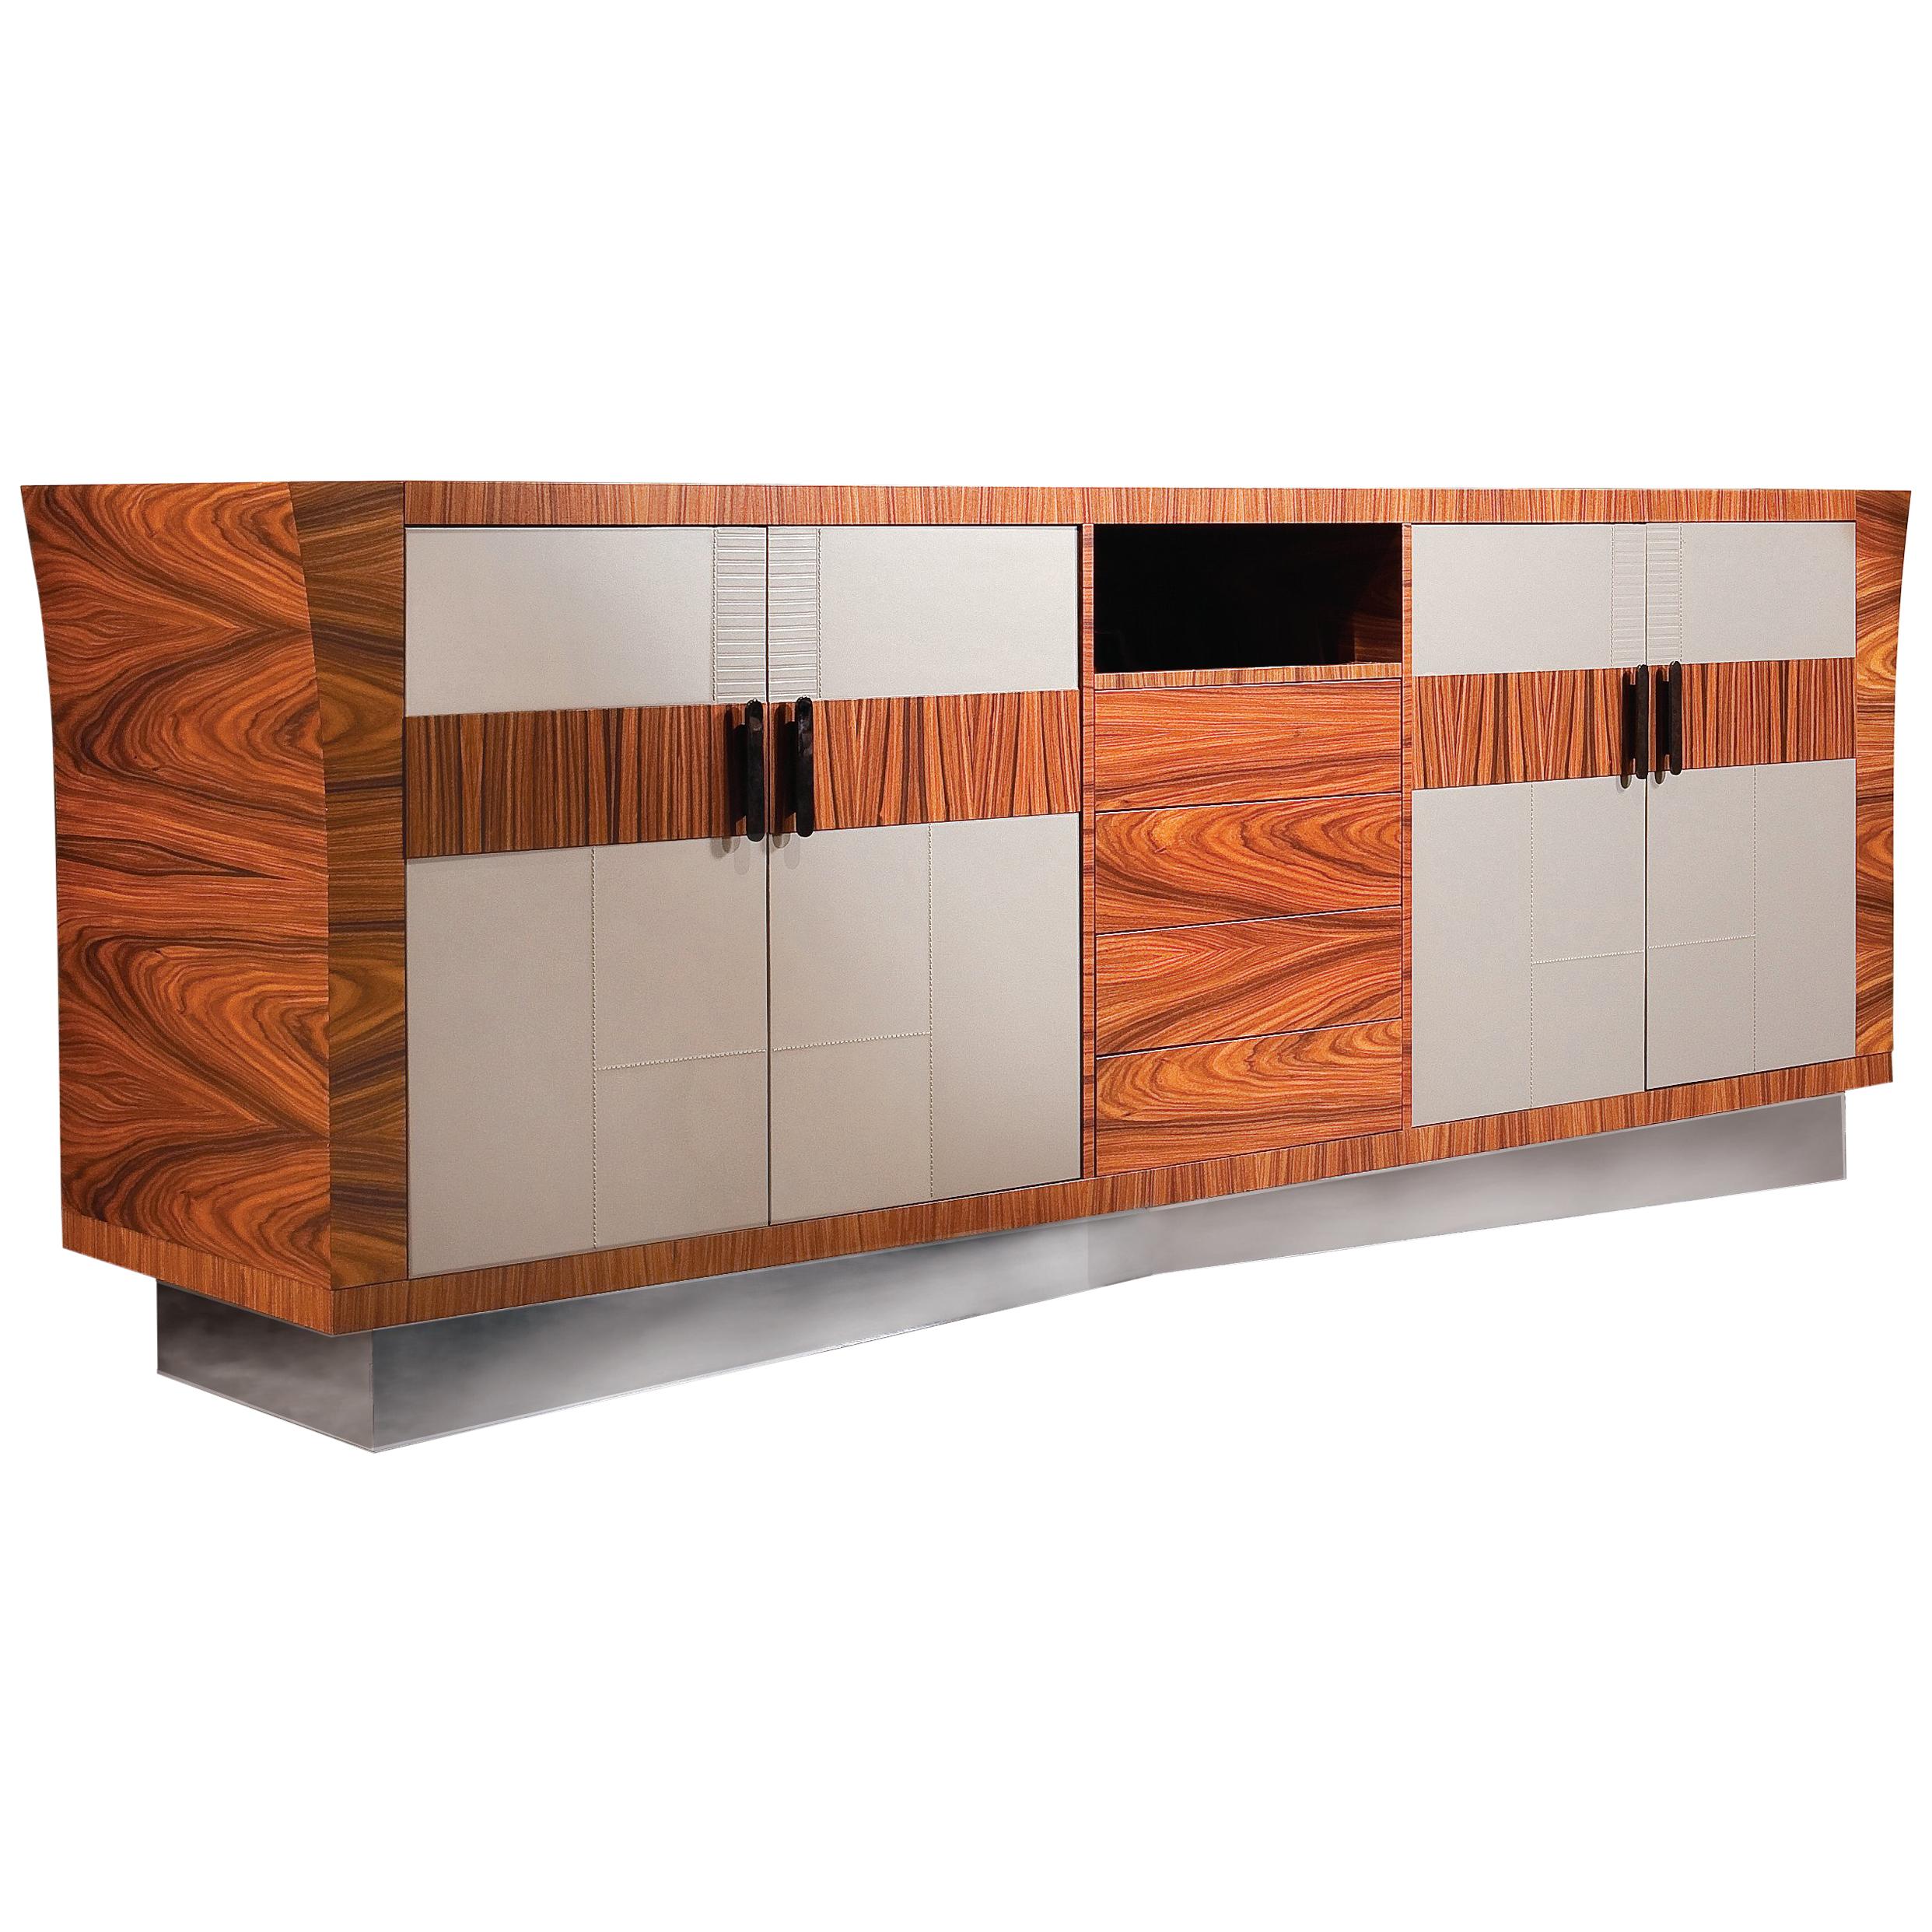  Umberto Asnago for Medea Mobilidea Sideboard with Drawers 